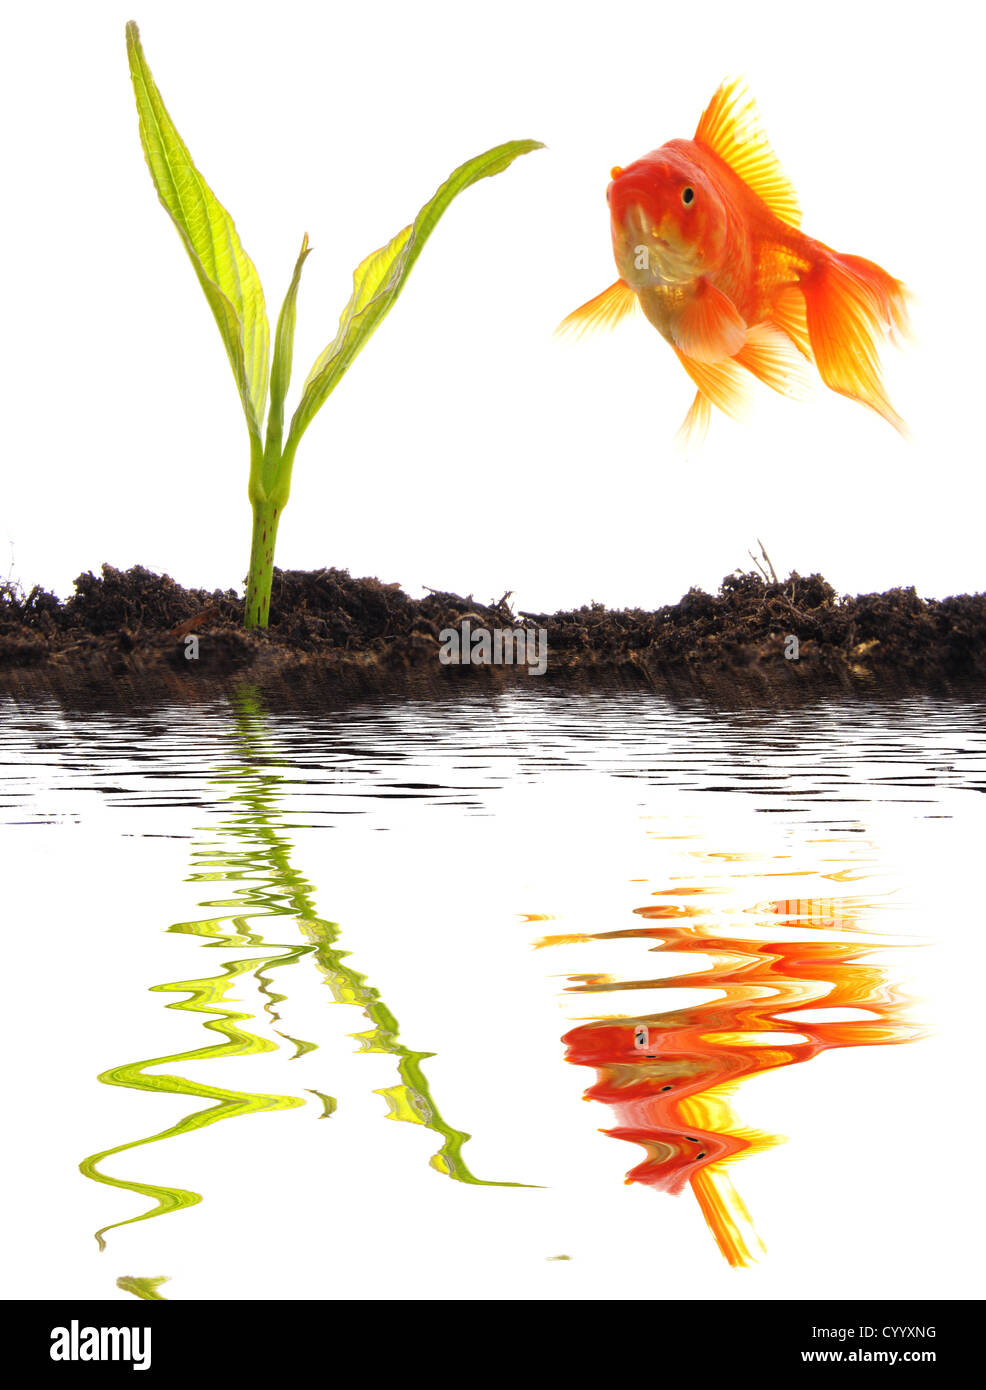 goldfish and young plant showing growth or nature concept Stock Photo